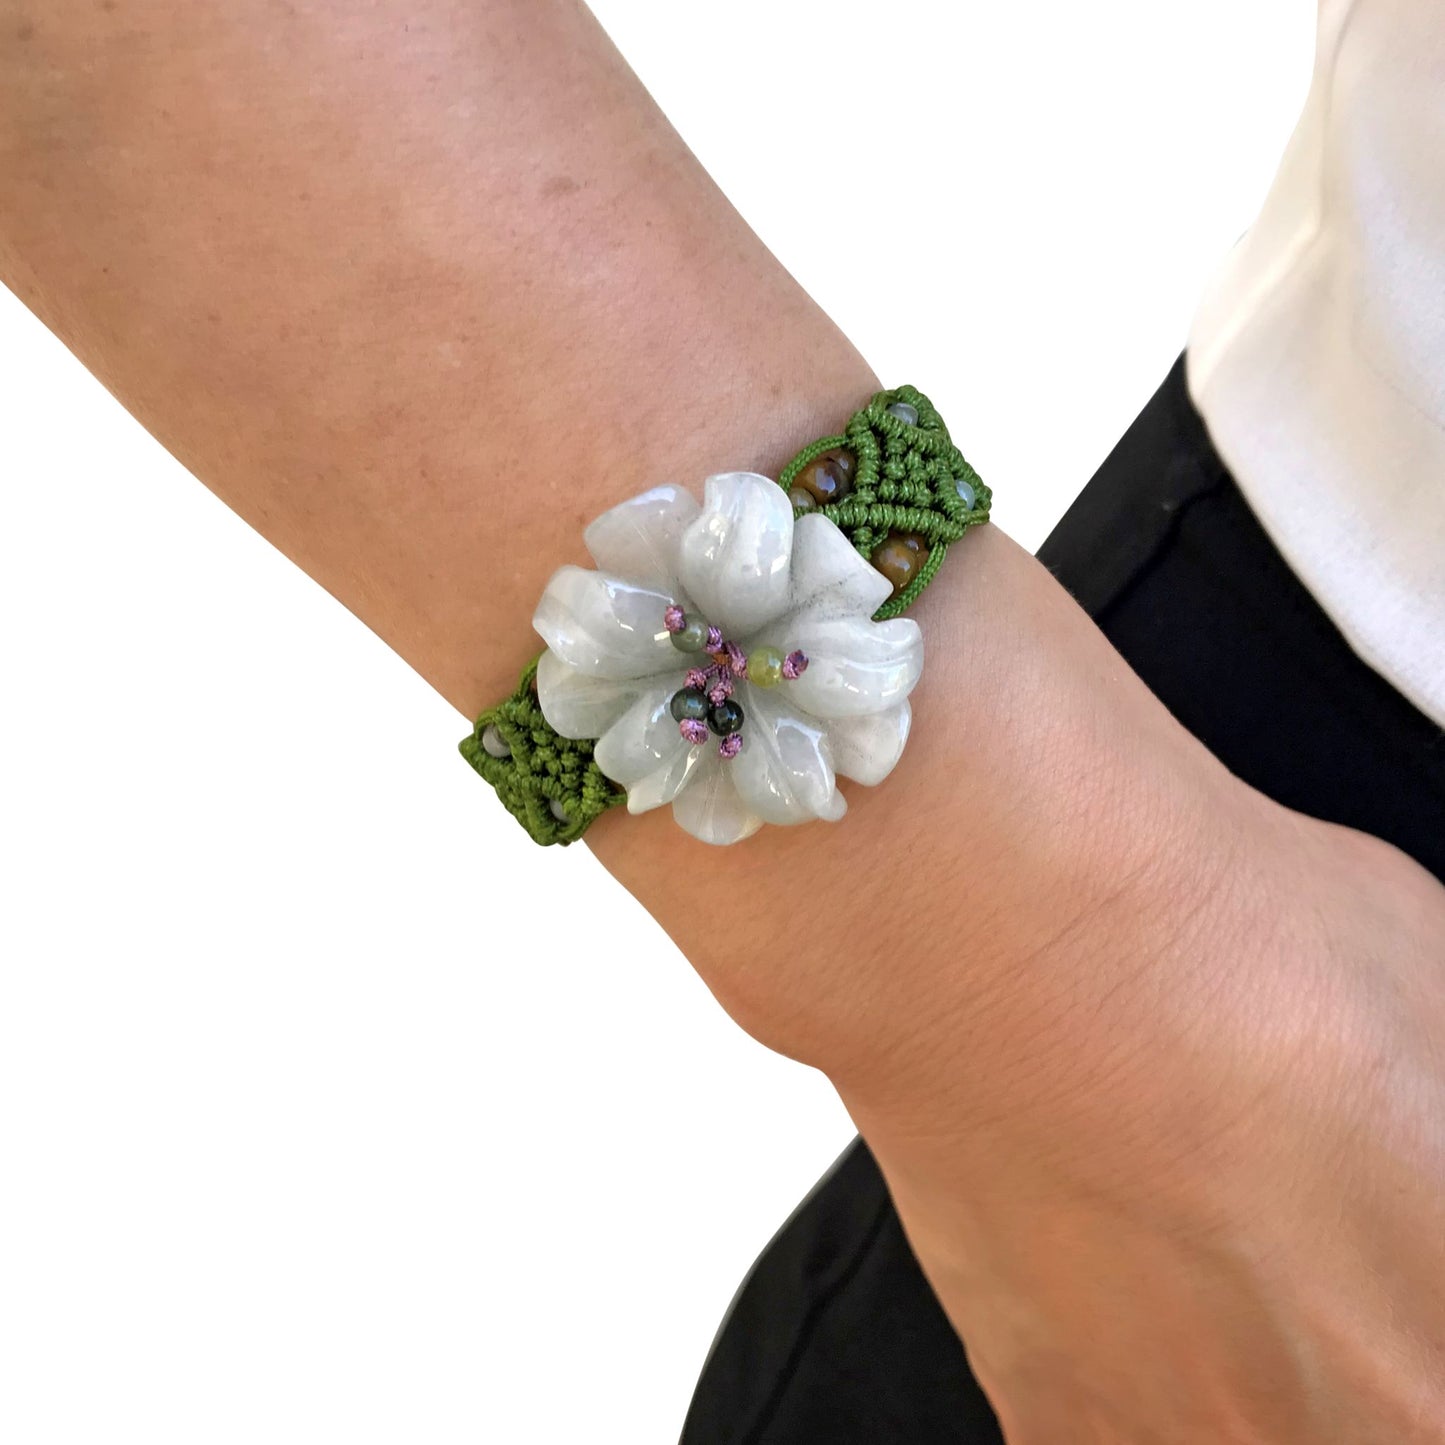 Show your Love of the Sea with Anemone Flower Bracelet made with Lime Cord